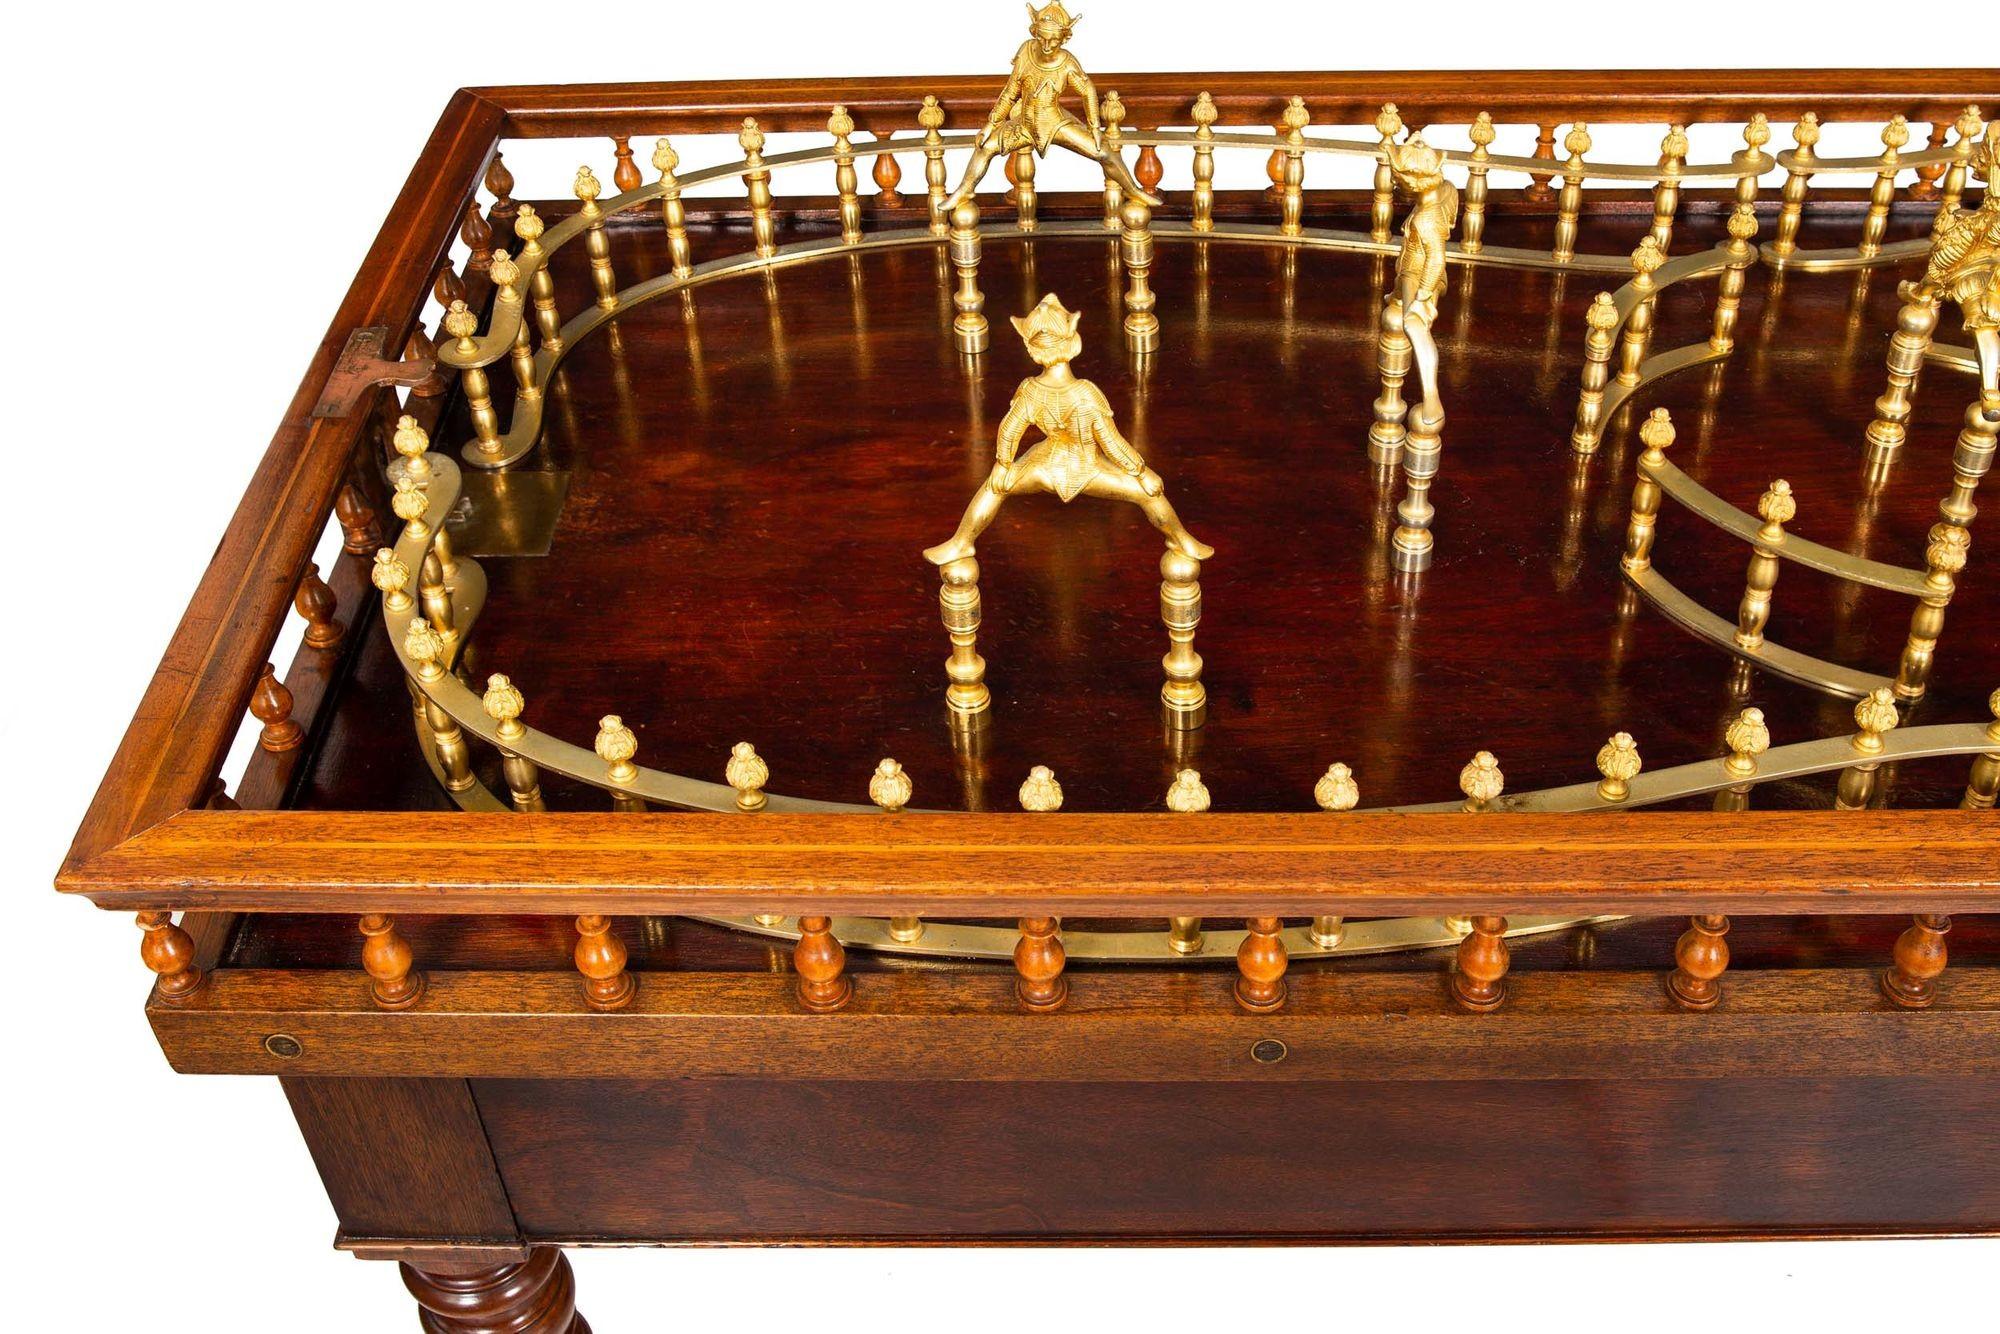 19th Century English Victorian Mahogany Antique Skittles Game Table